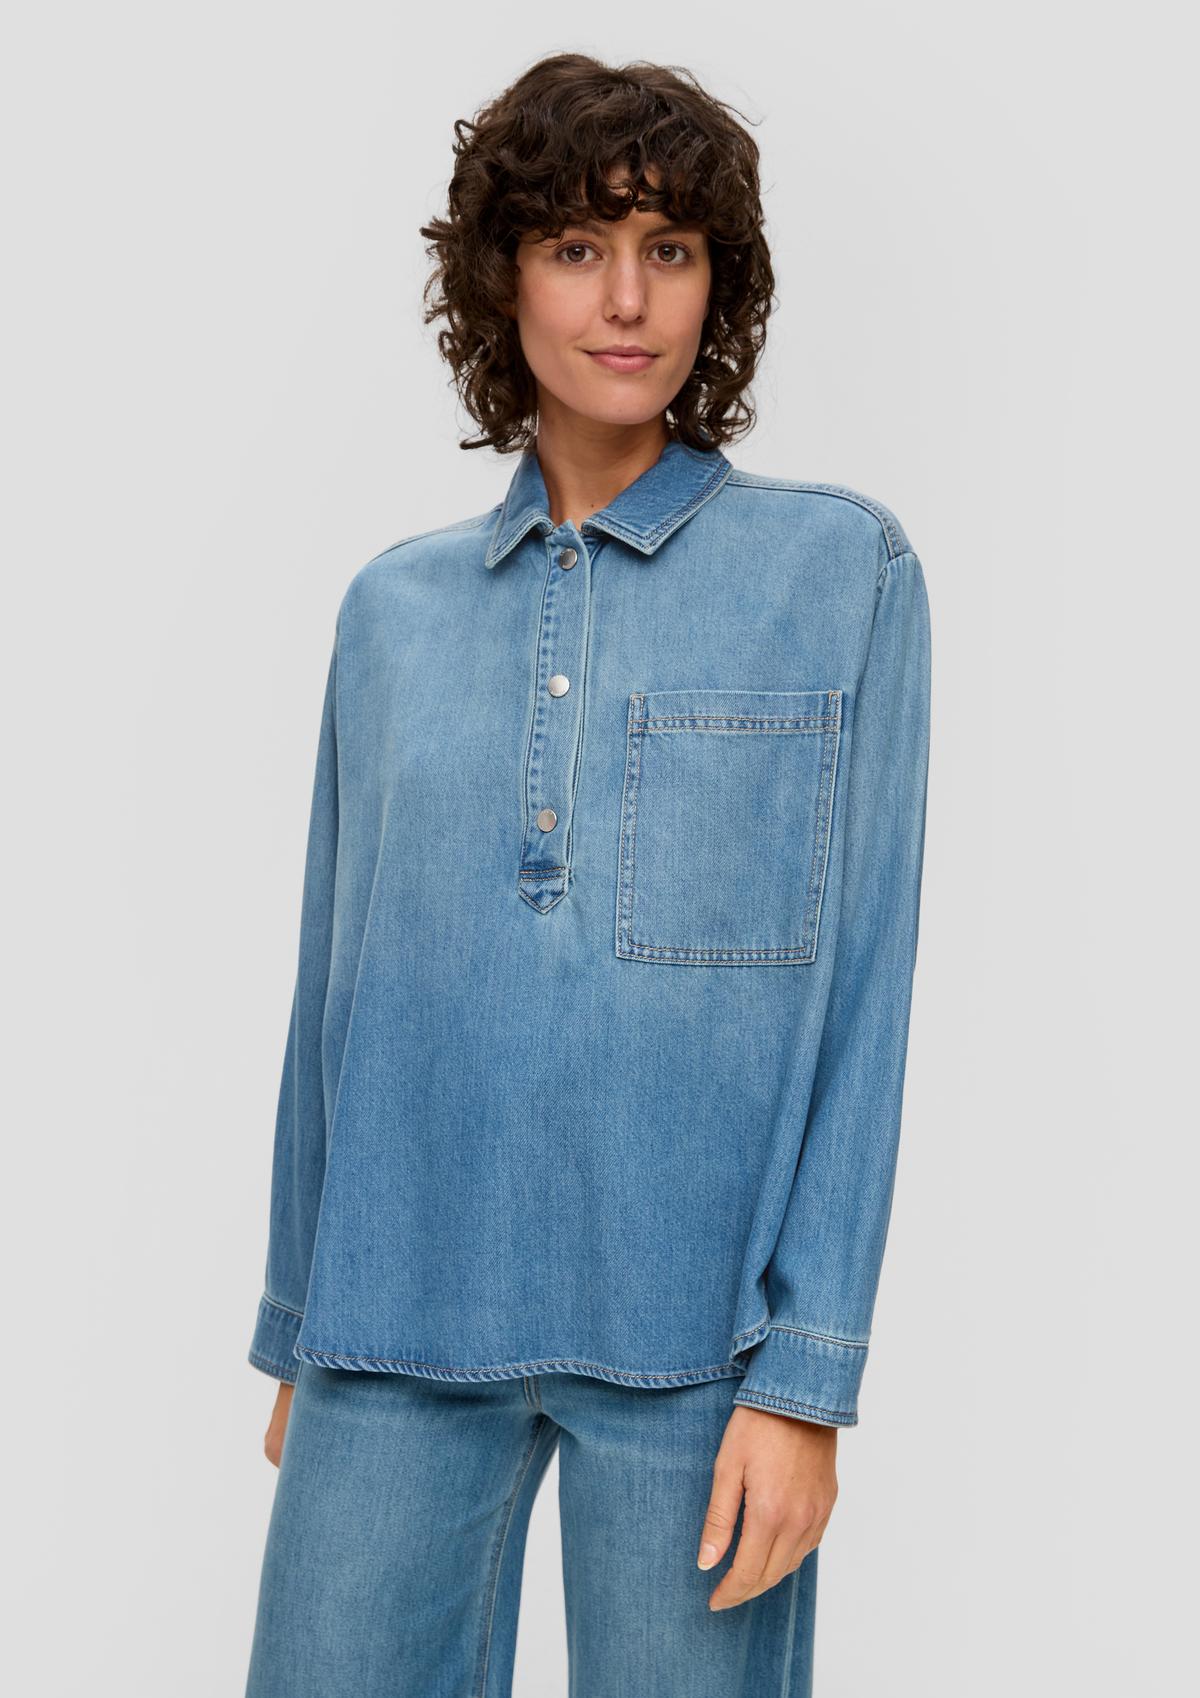 Jeans-Overshirt im Loose Fit